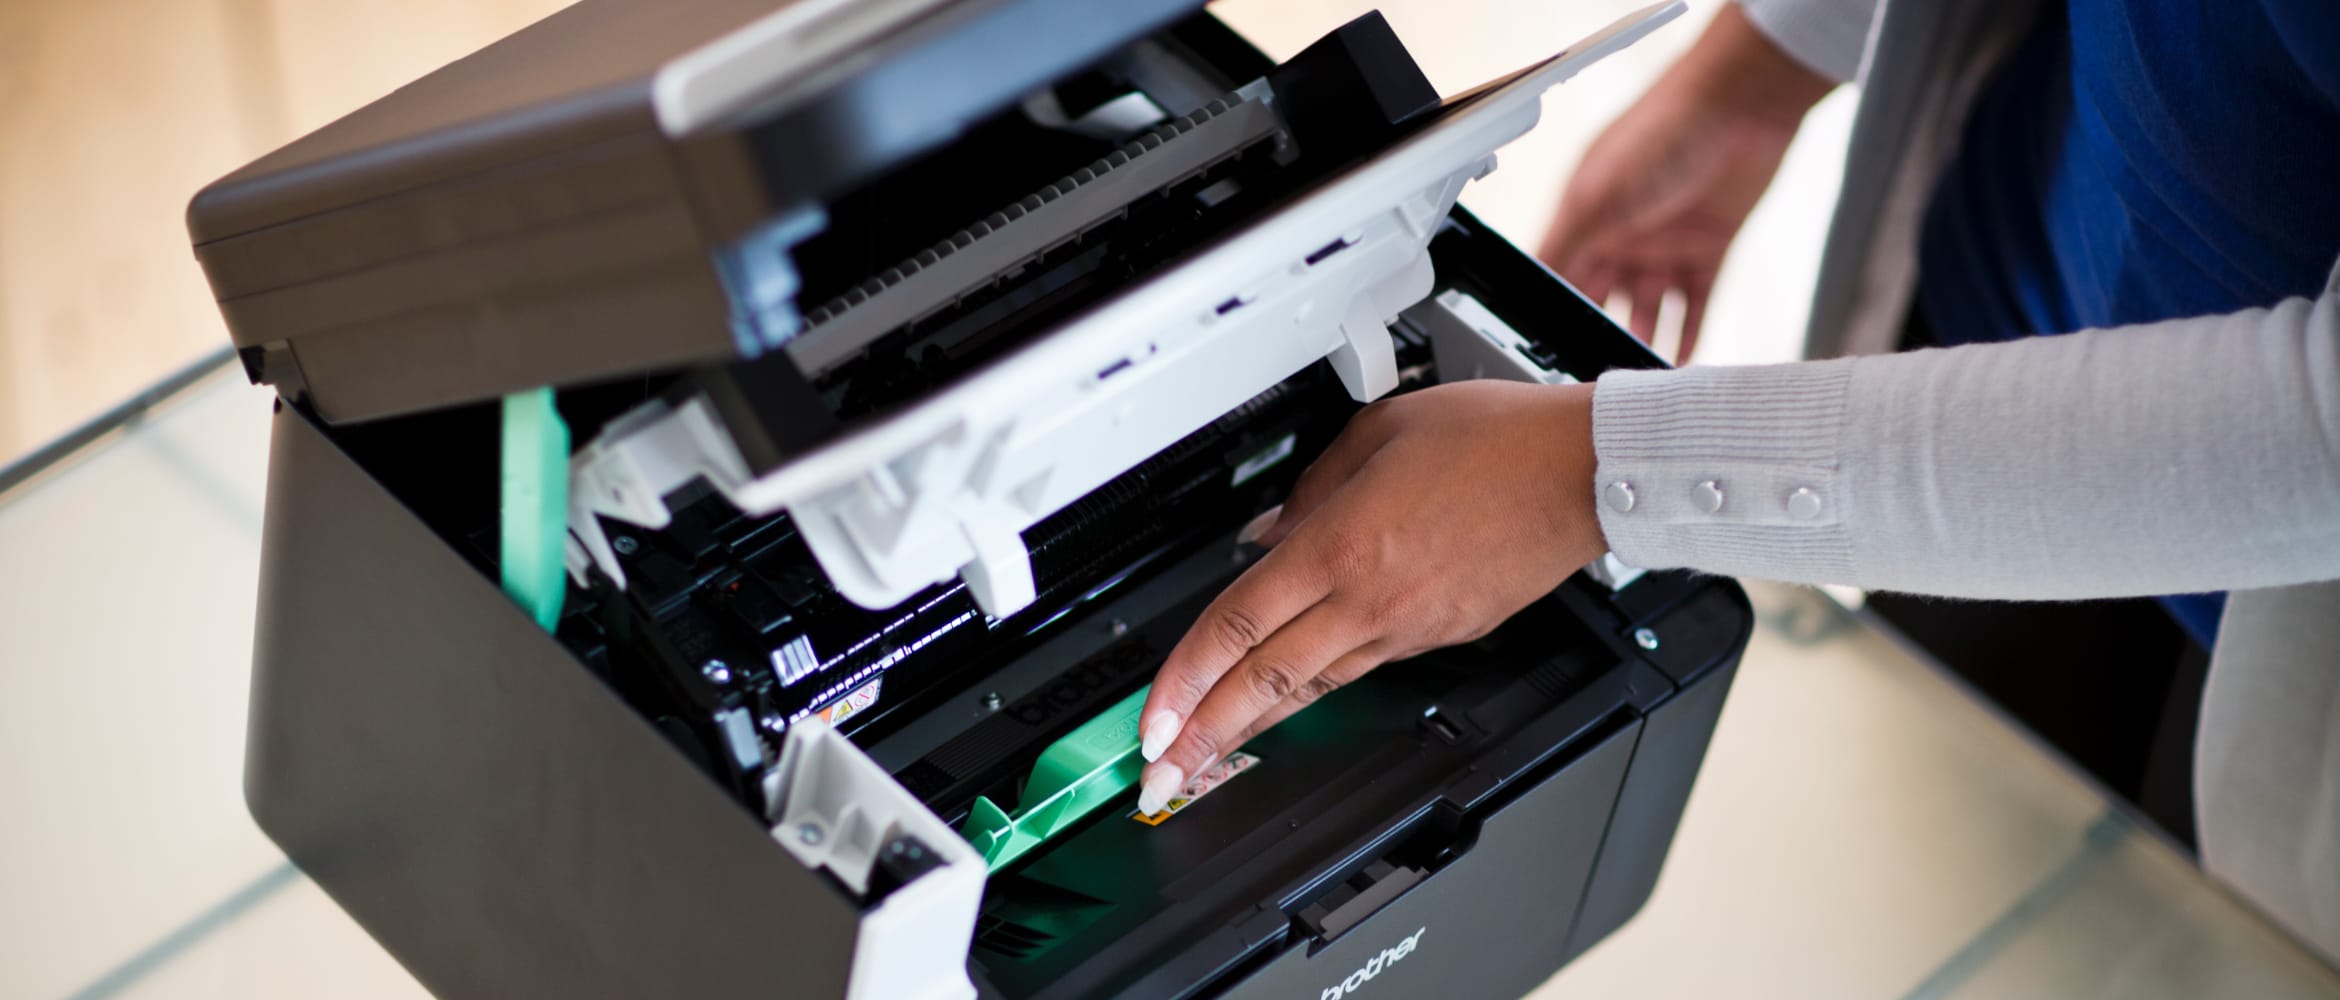 How does a laser printer work?